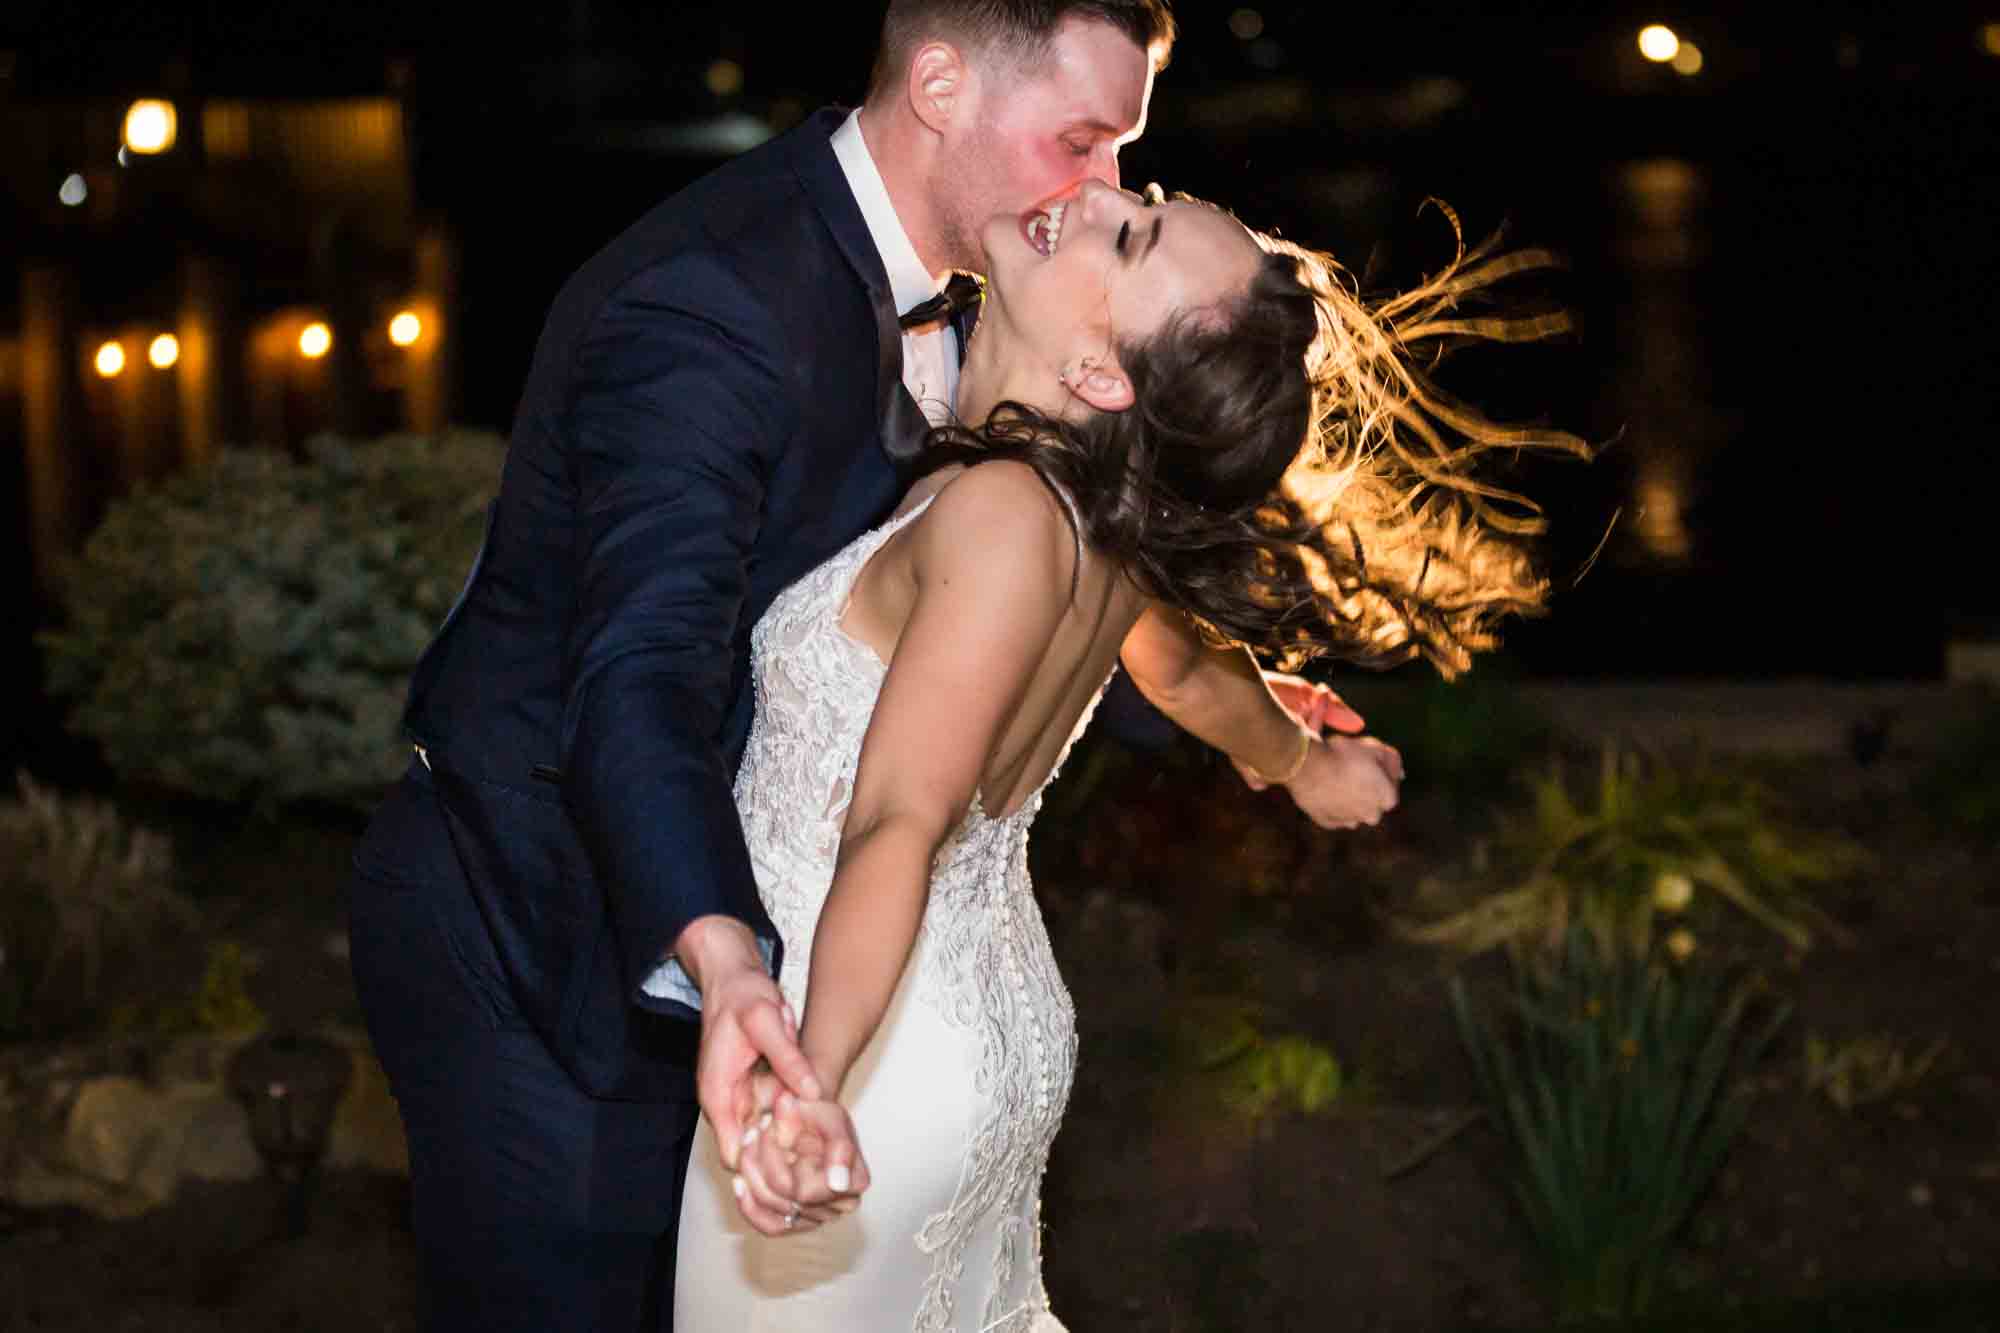 Bride and groom outdoors at night with dramatic lighting 